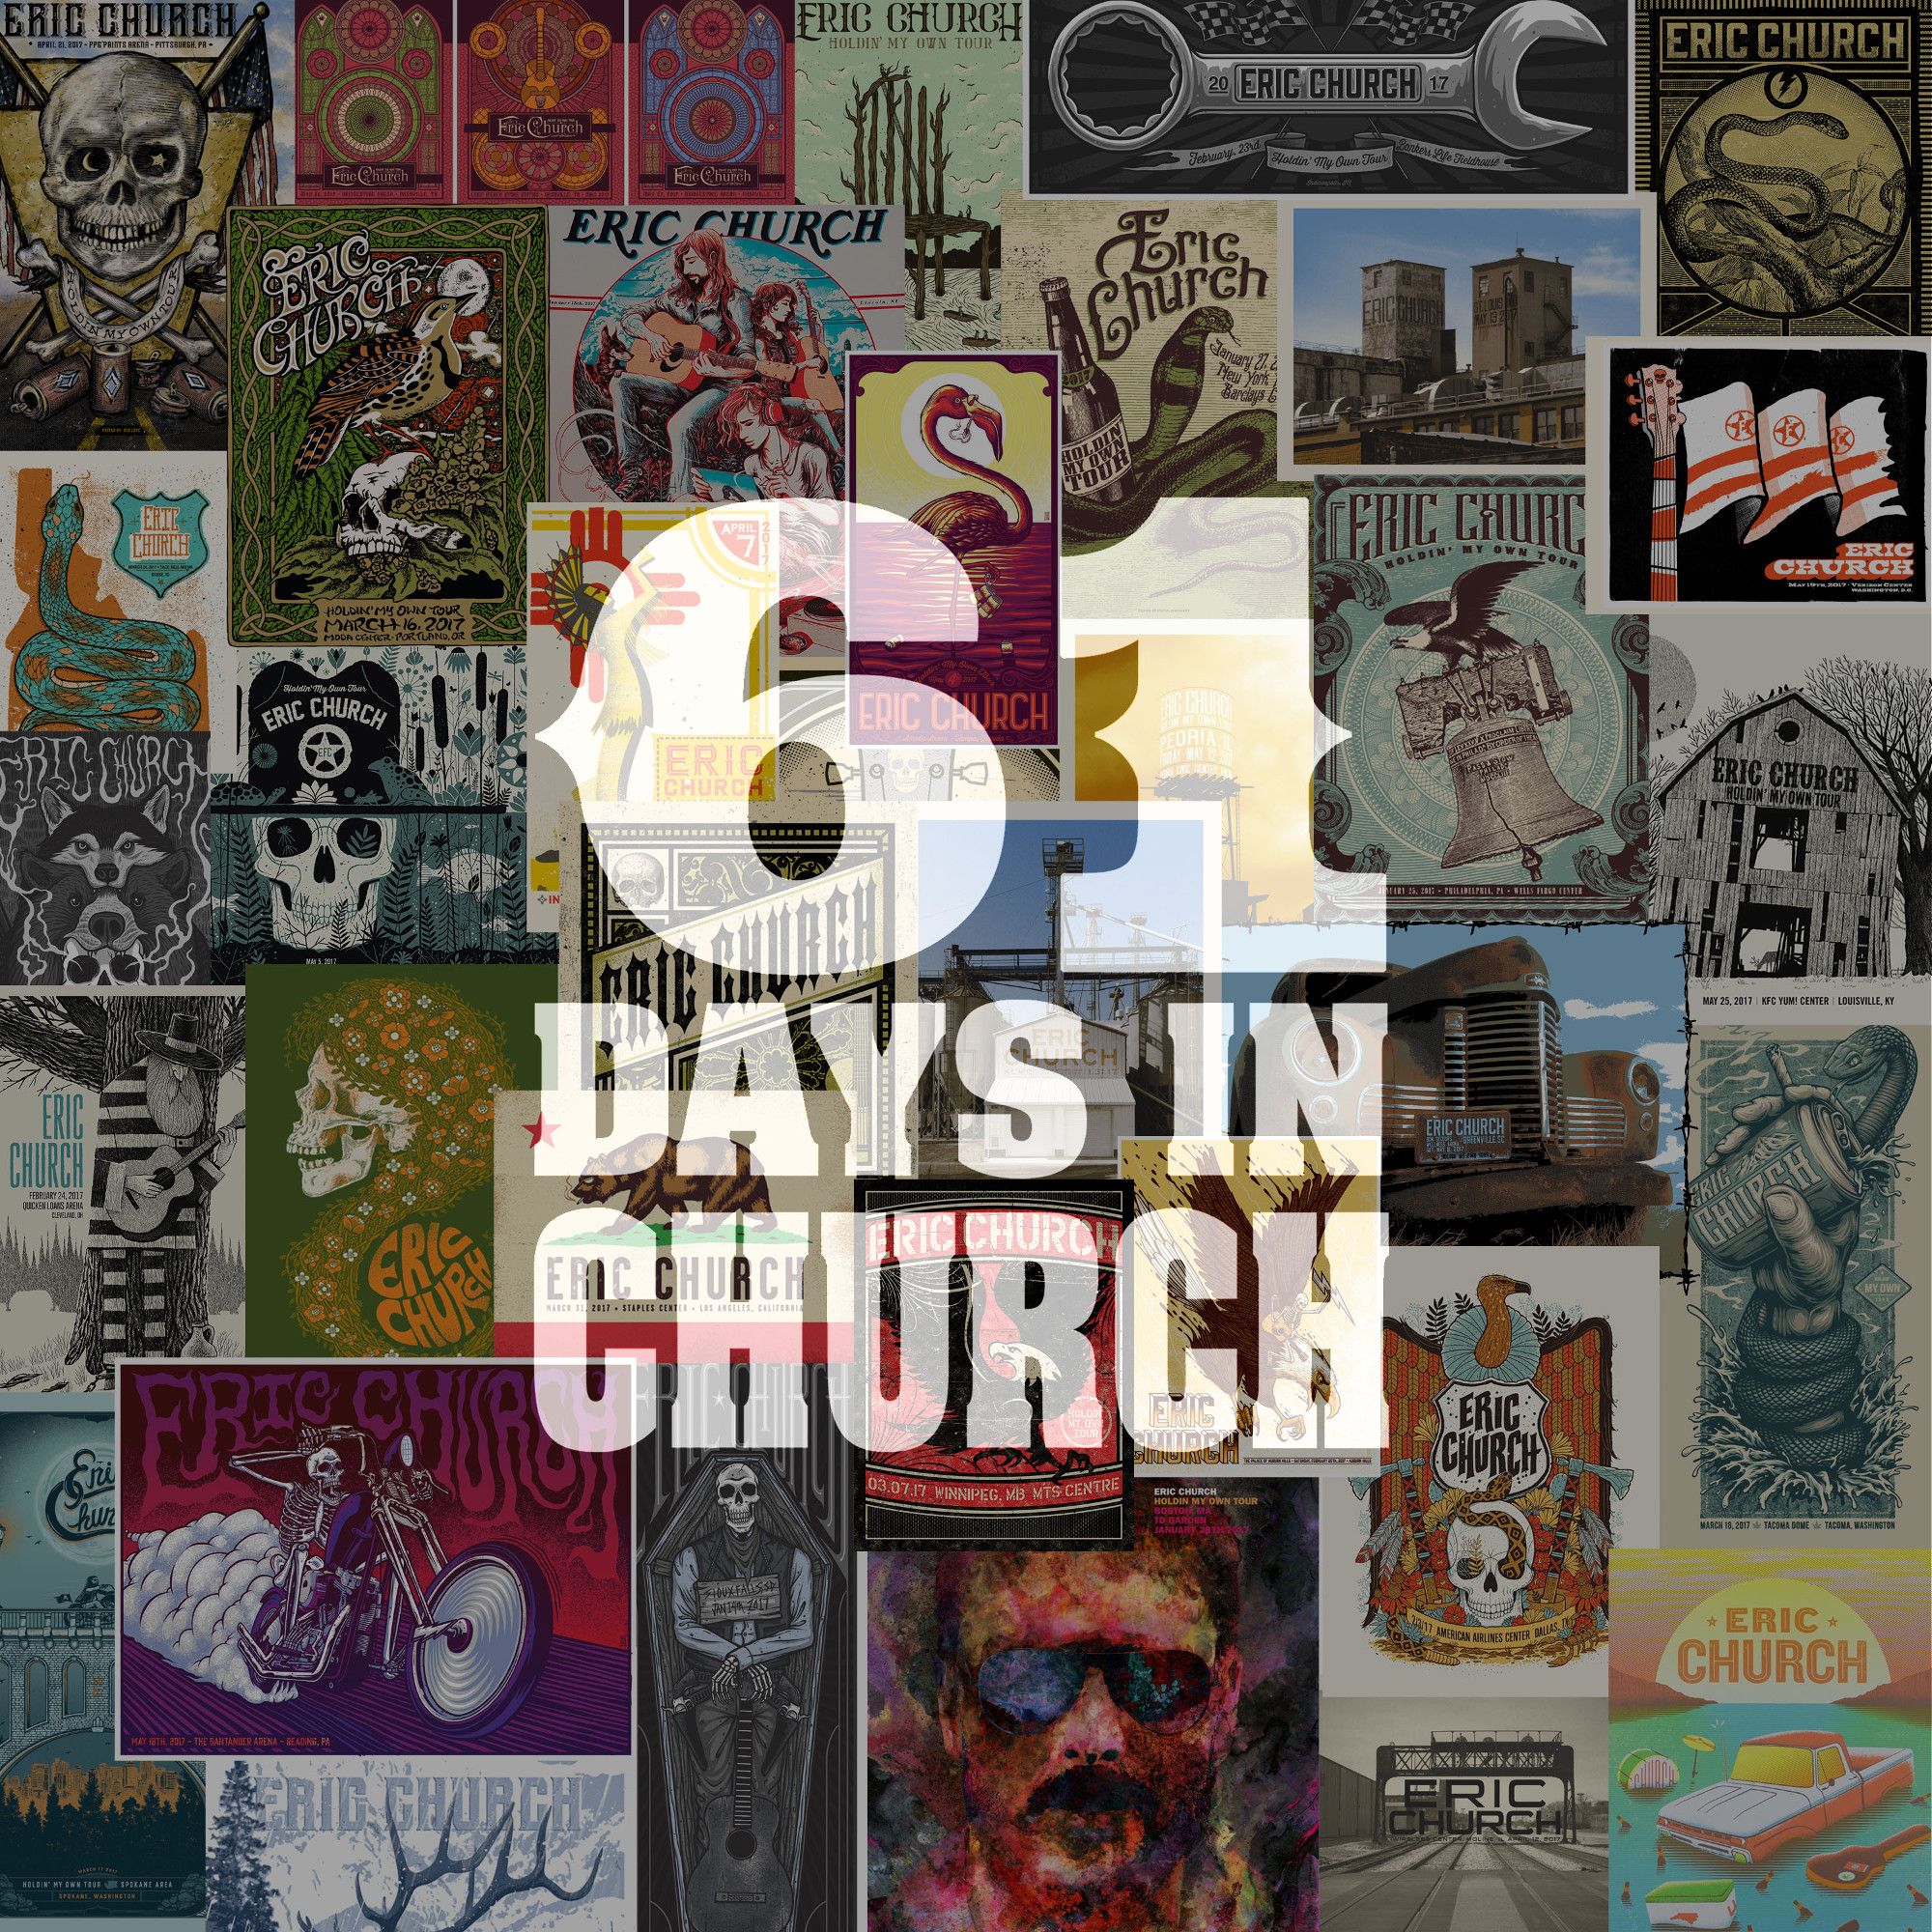 ERIC CHURCH’S 61 DAYS IN CHURCH CONTINUES: NEXT 30 SONGS RELEASED TODAY